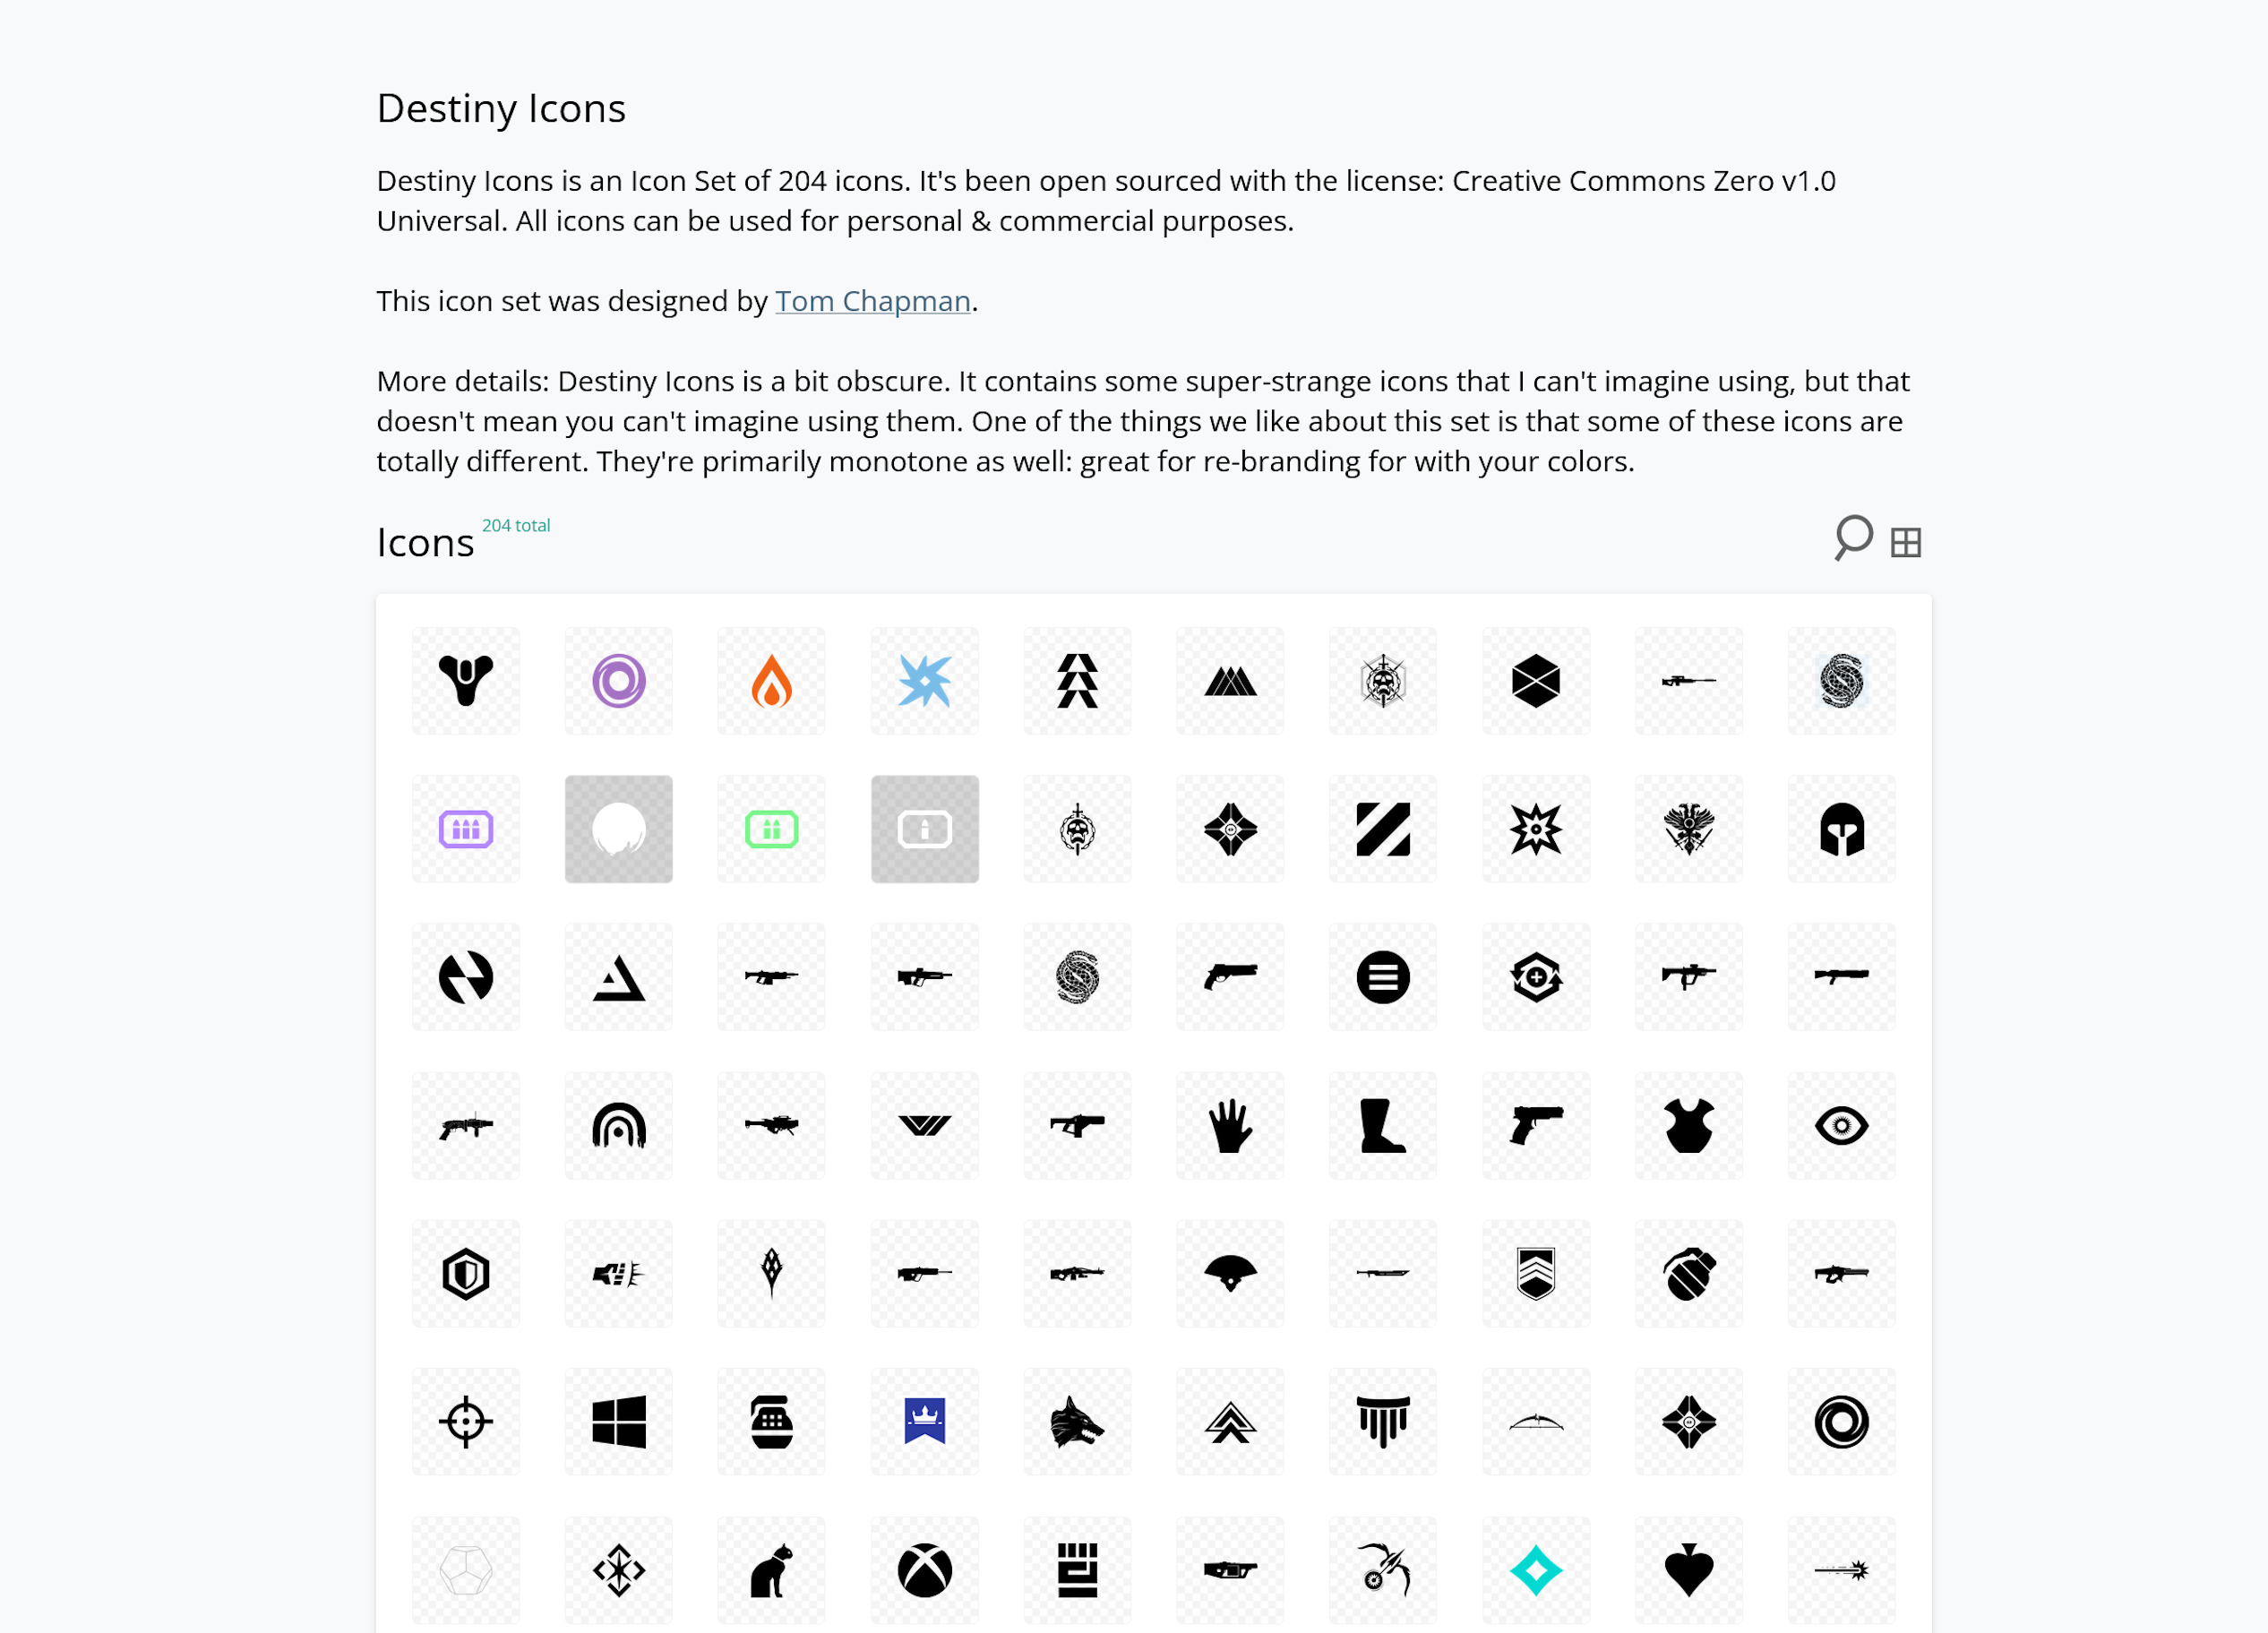 Destiny 2 icons listed at Iconduck